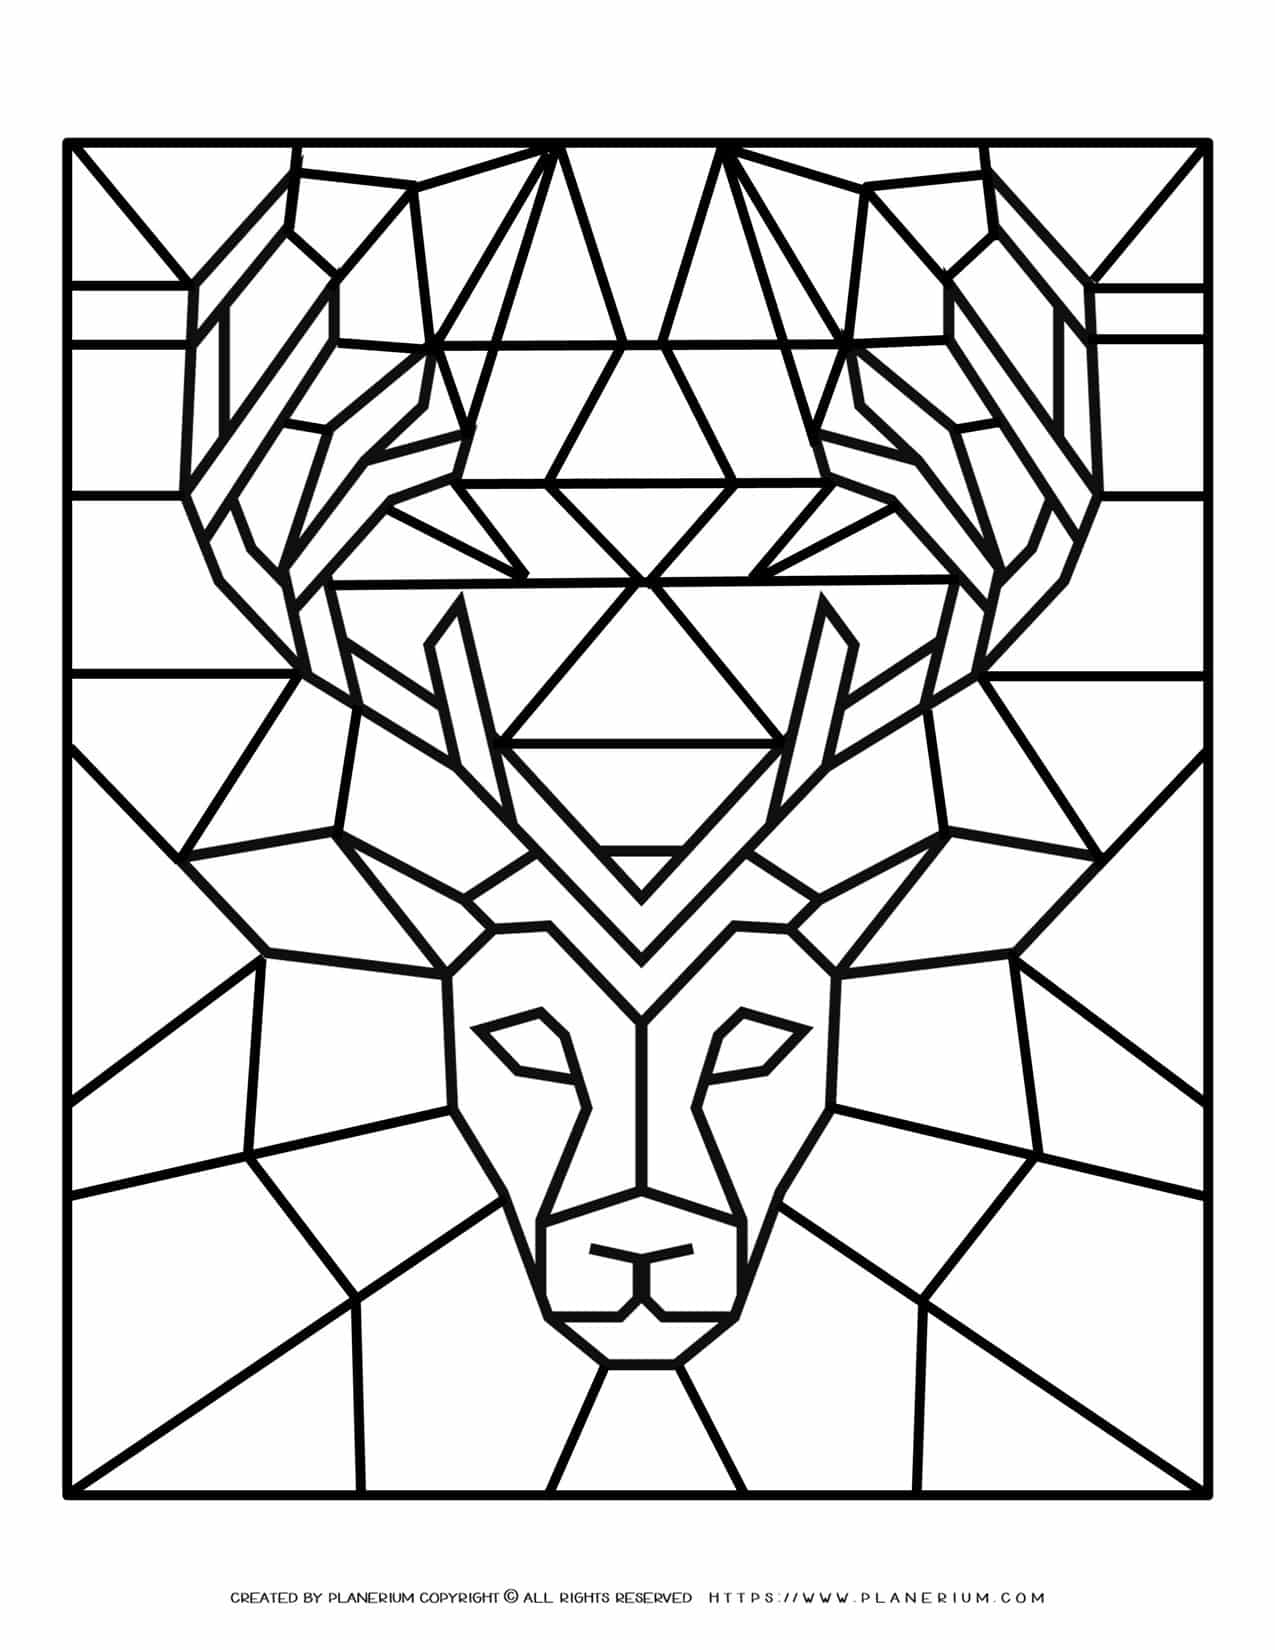 Adult Coloring Pages - Geometric Animals - Deer - Free Printable | Planerium